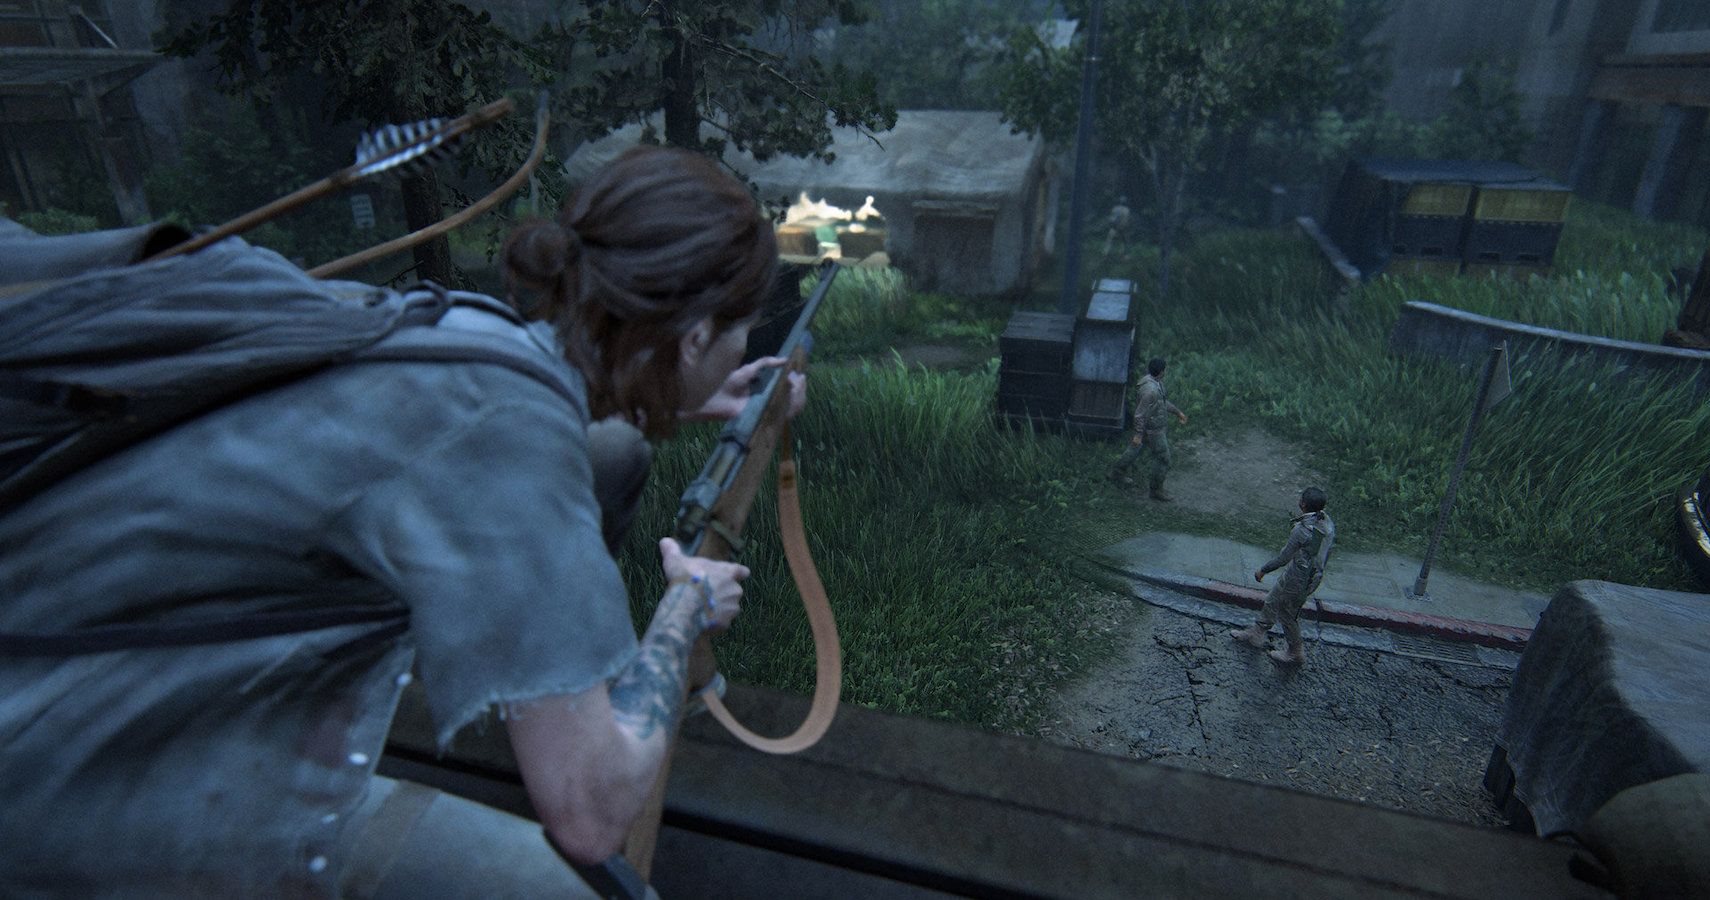 The Last of Us 2 Ellie holding a rifle above the enemy